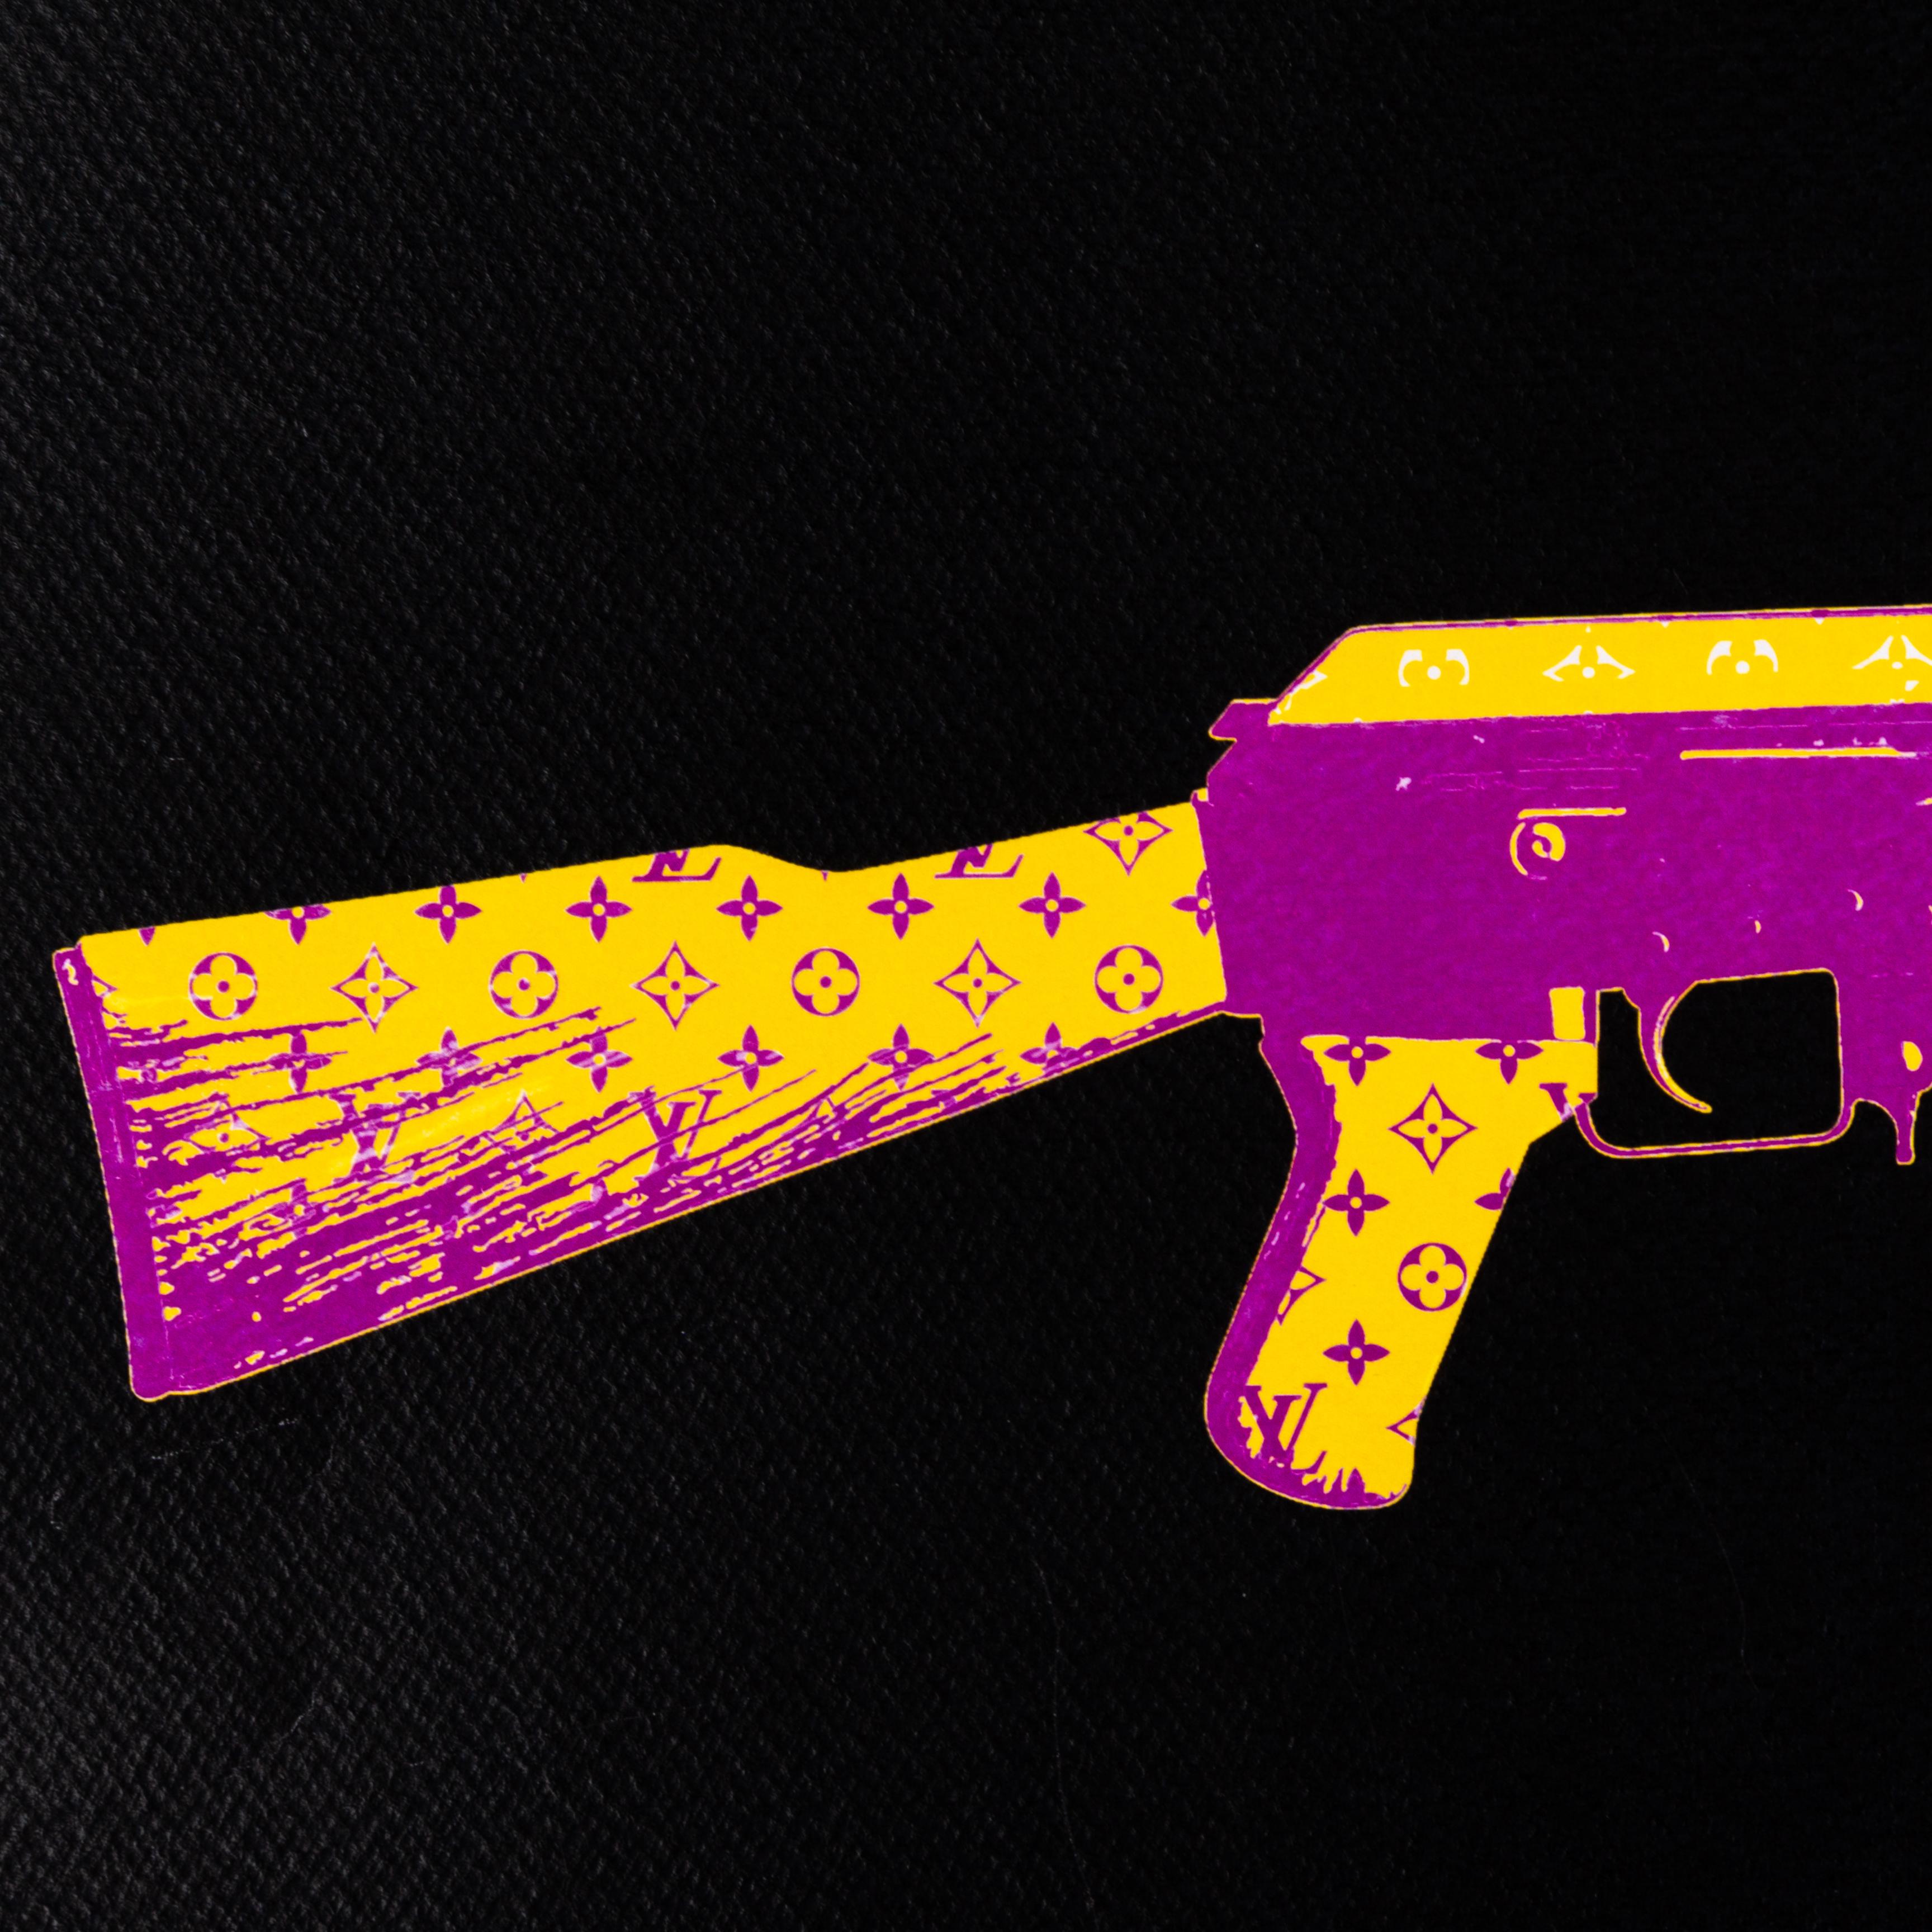 From a private collection.
Death NYC Signed Limited Ed Pop Art Print Louis Vuitton AK47